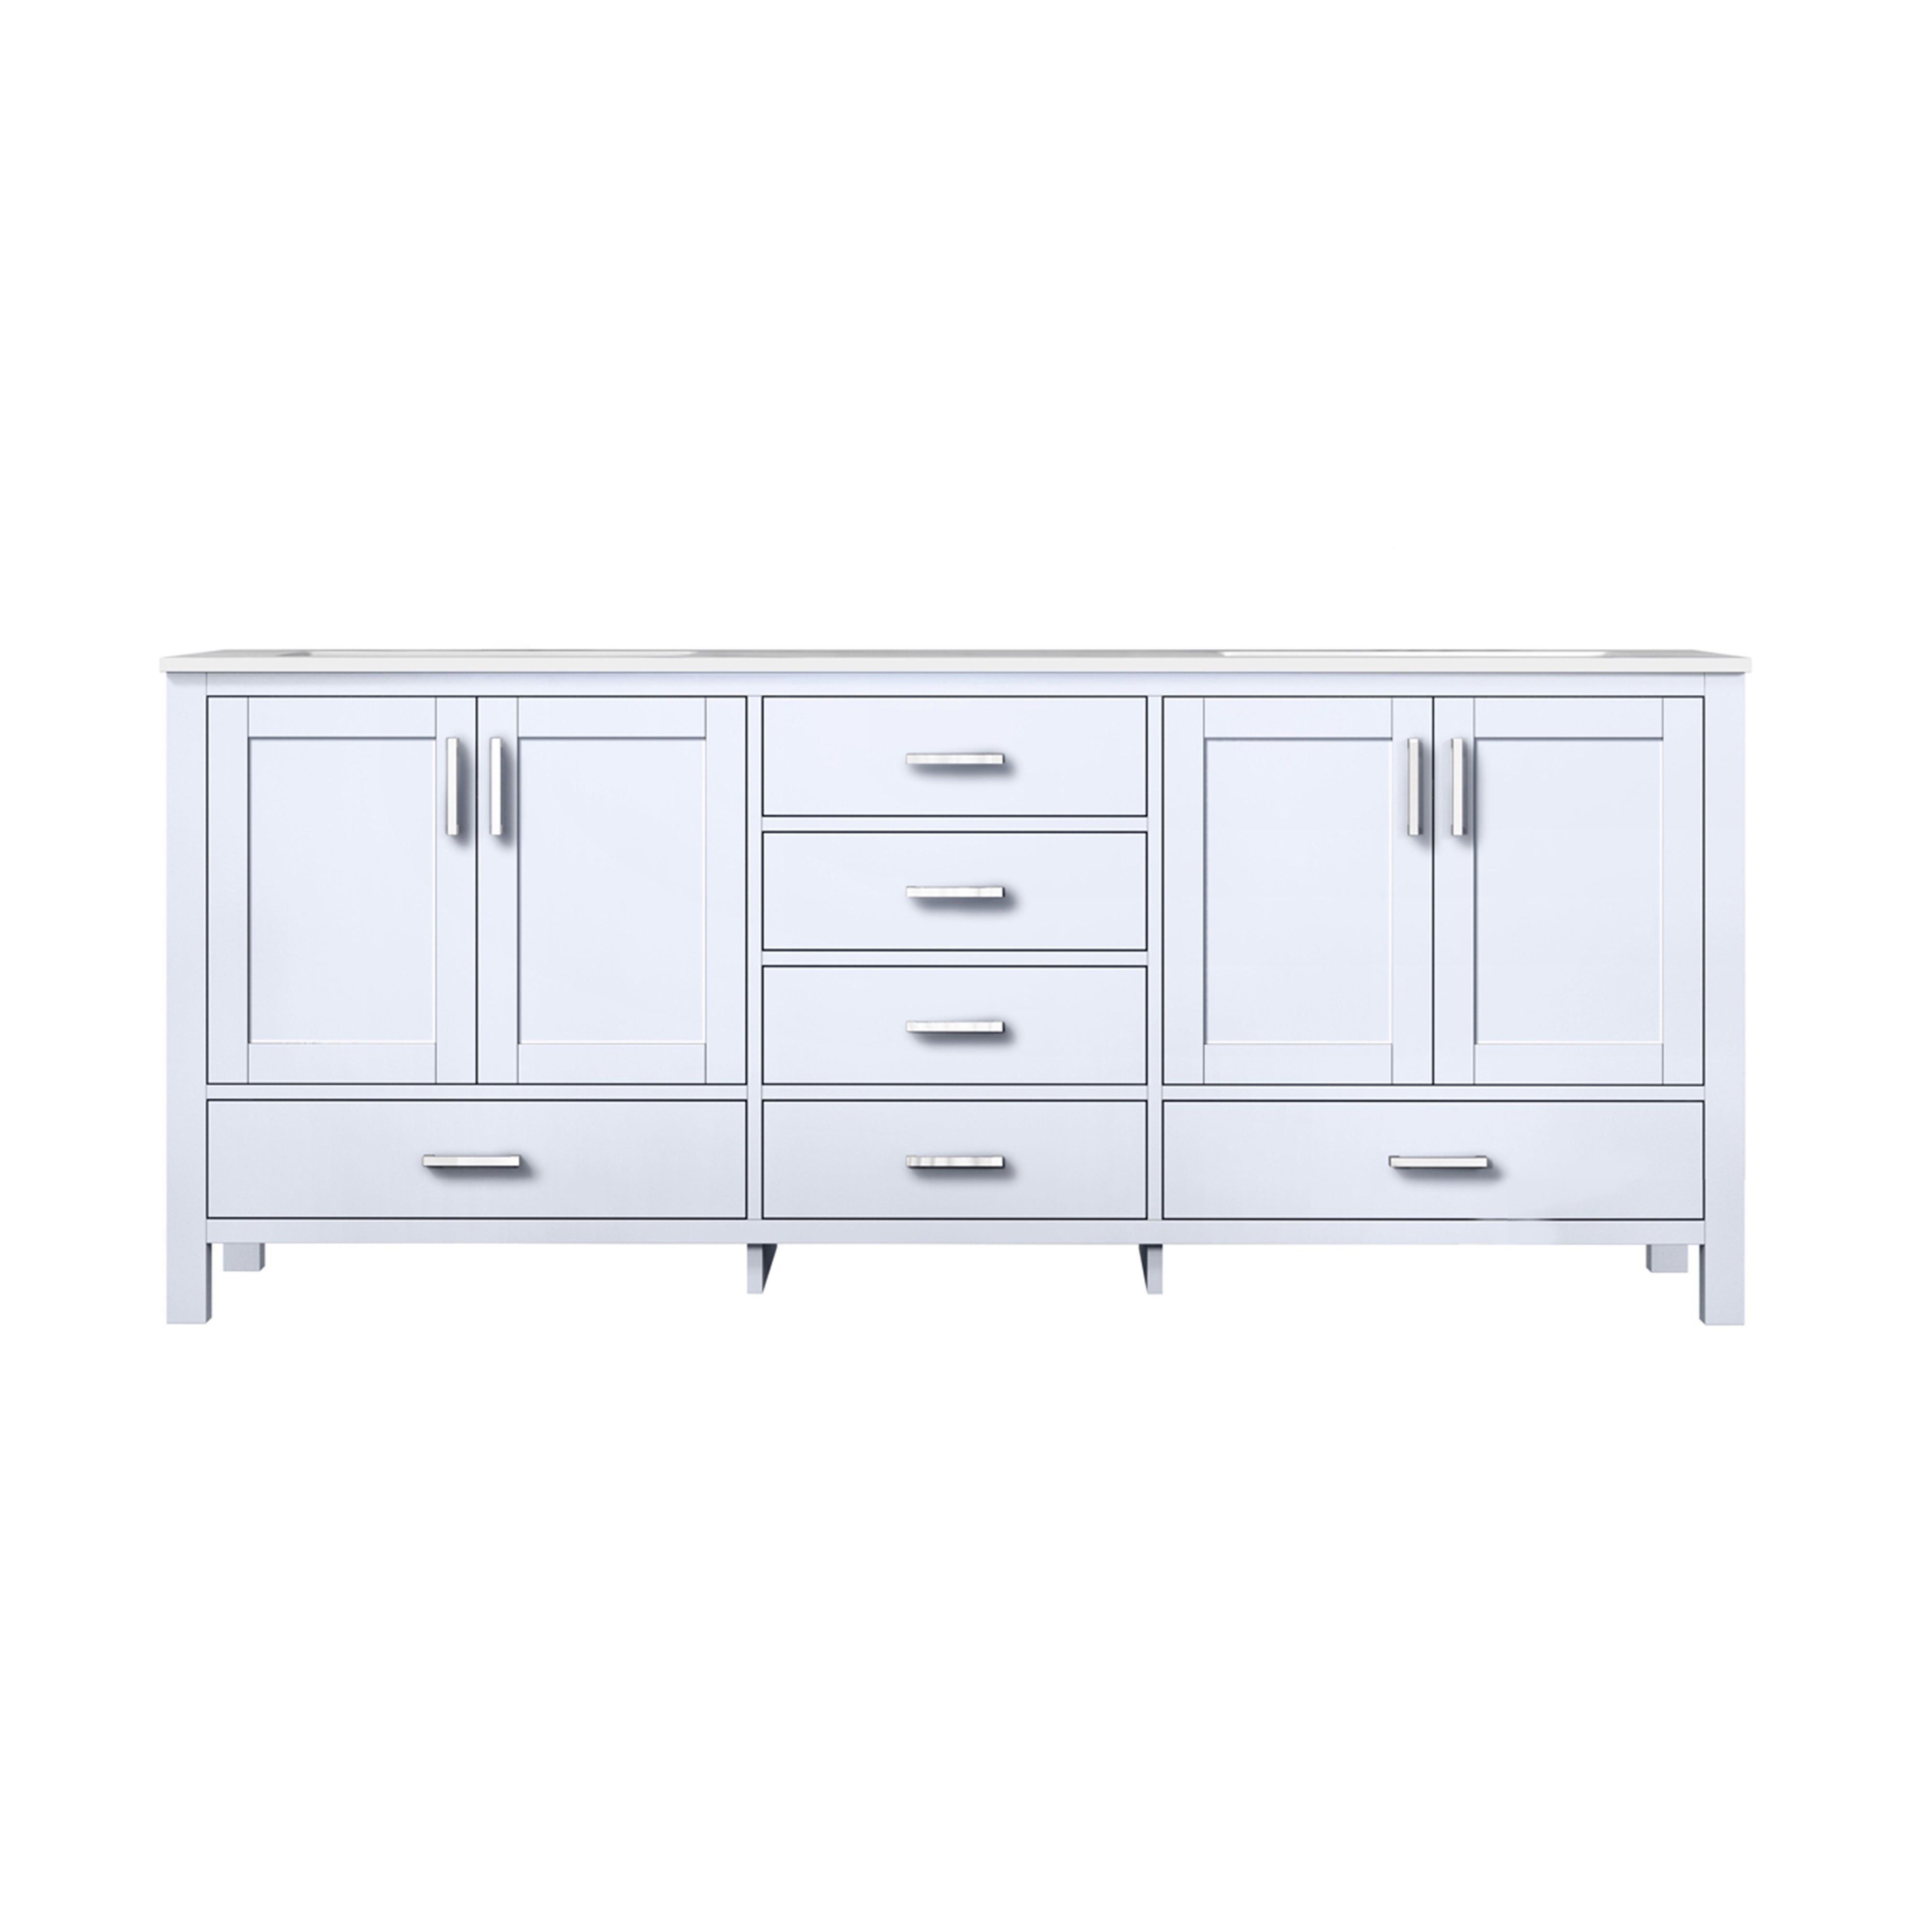 Lexora Jacques LJ342280DADS000 80" Double Bathroom Vanity in White with White Carrara Marble, White Rectangle Sinks, Front View